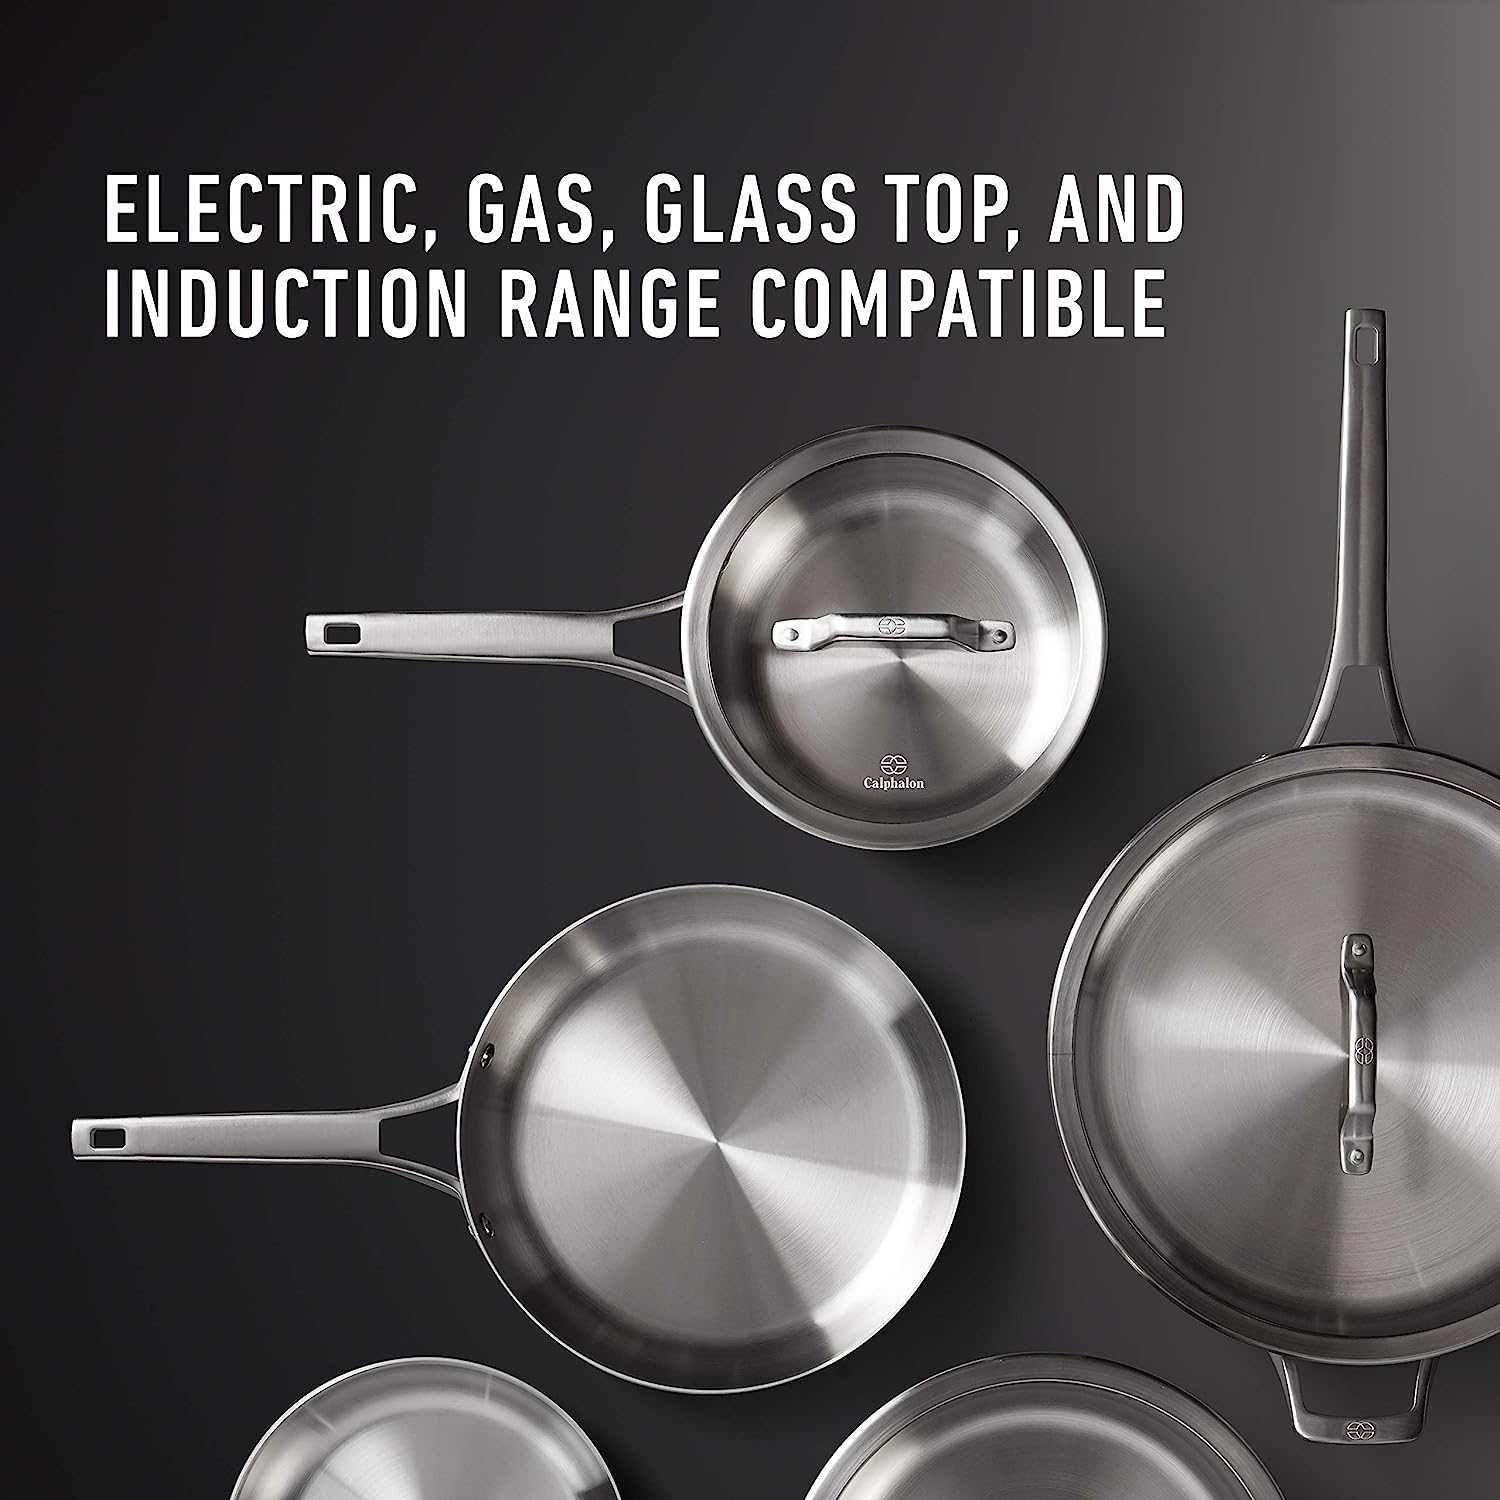 https://bigbigmart.com/wp-content/uploads/2023/09/Calphalon-11-Piece-Pots-and-Pans-Set-Stainless-Steel-Kitchen-Cookware-with-Stay-Cool-Handles-Dishwasher-Safe-Silver11.jpg